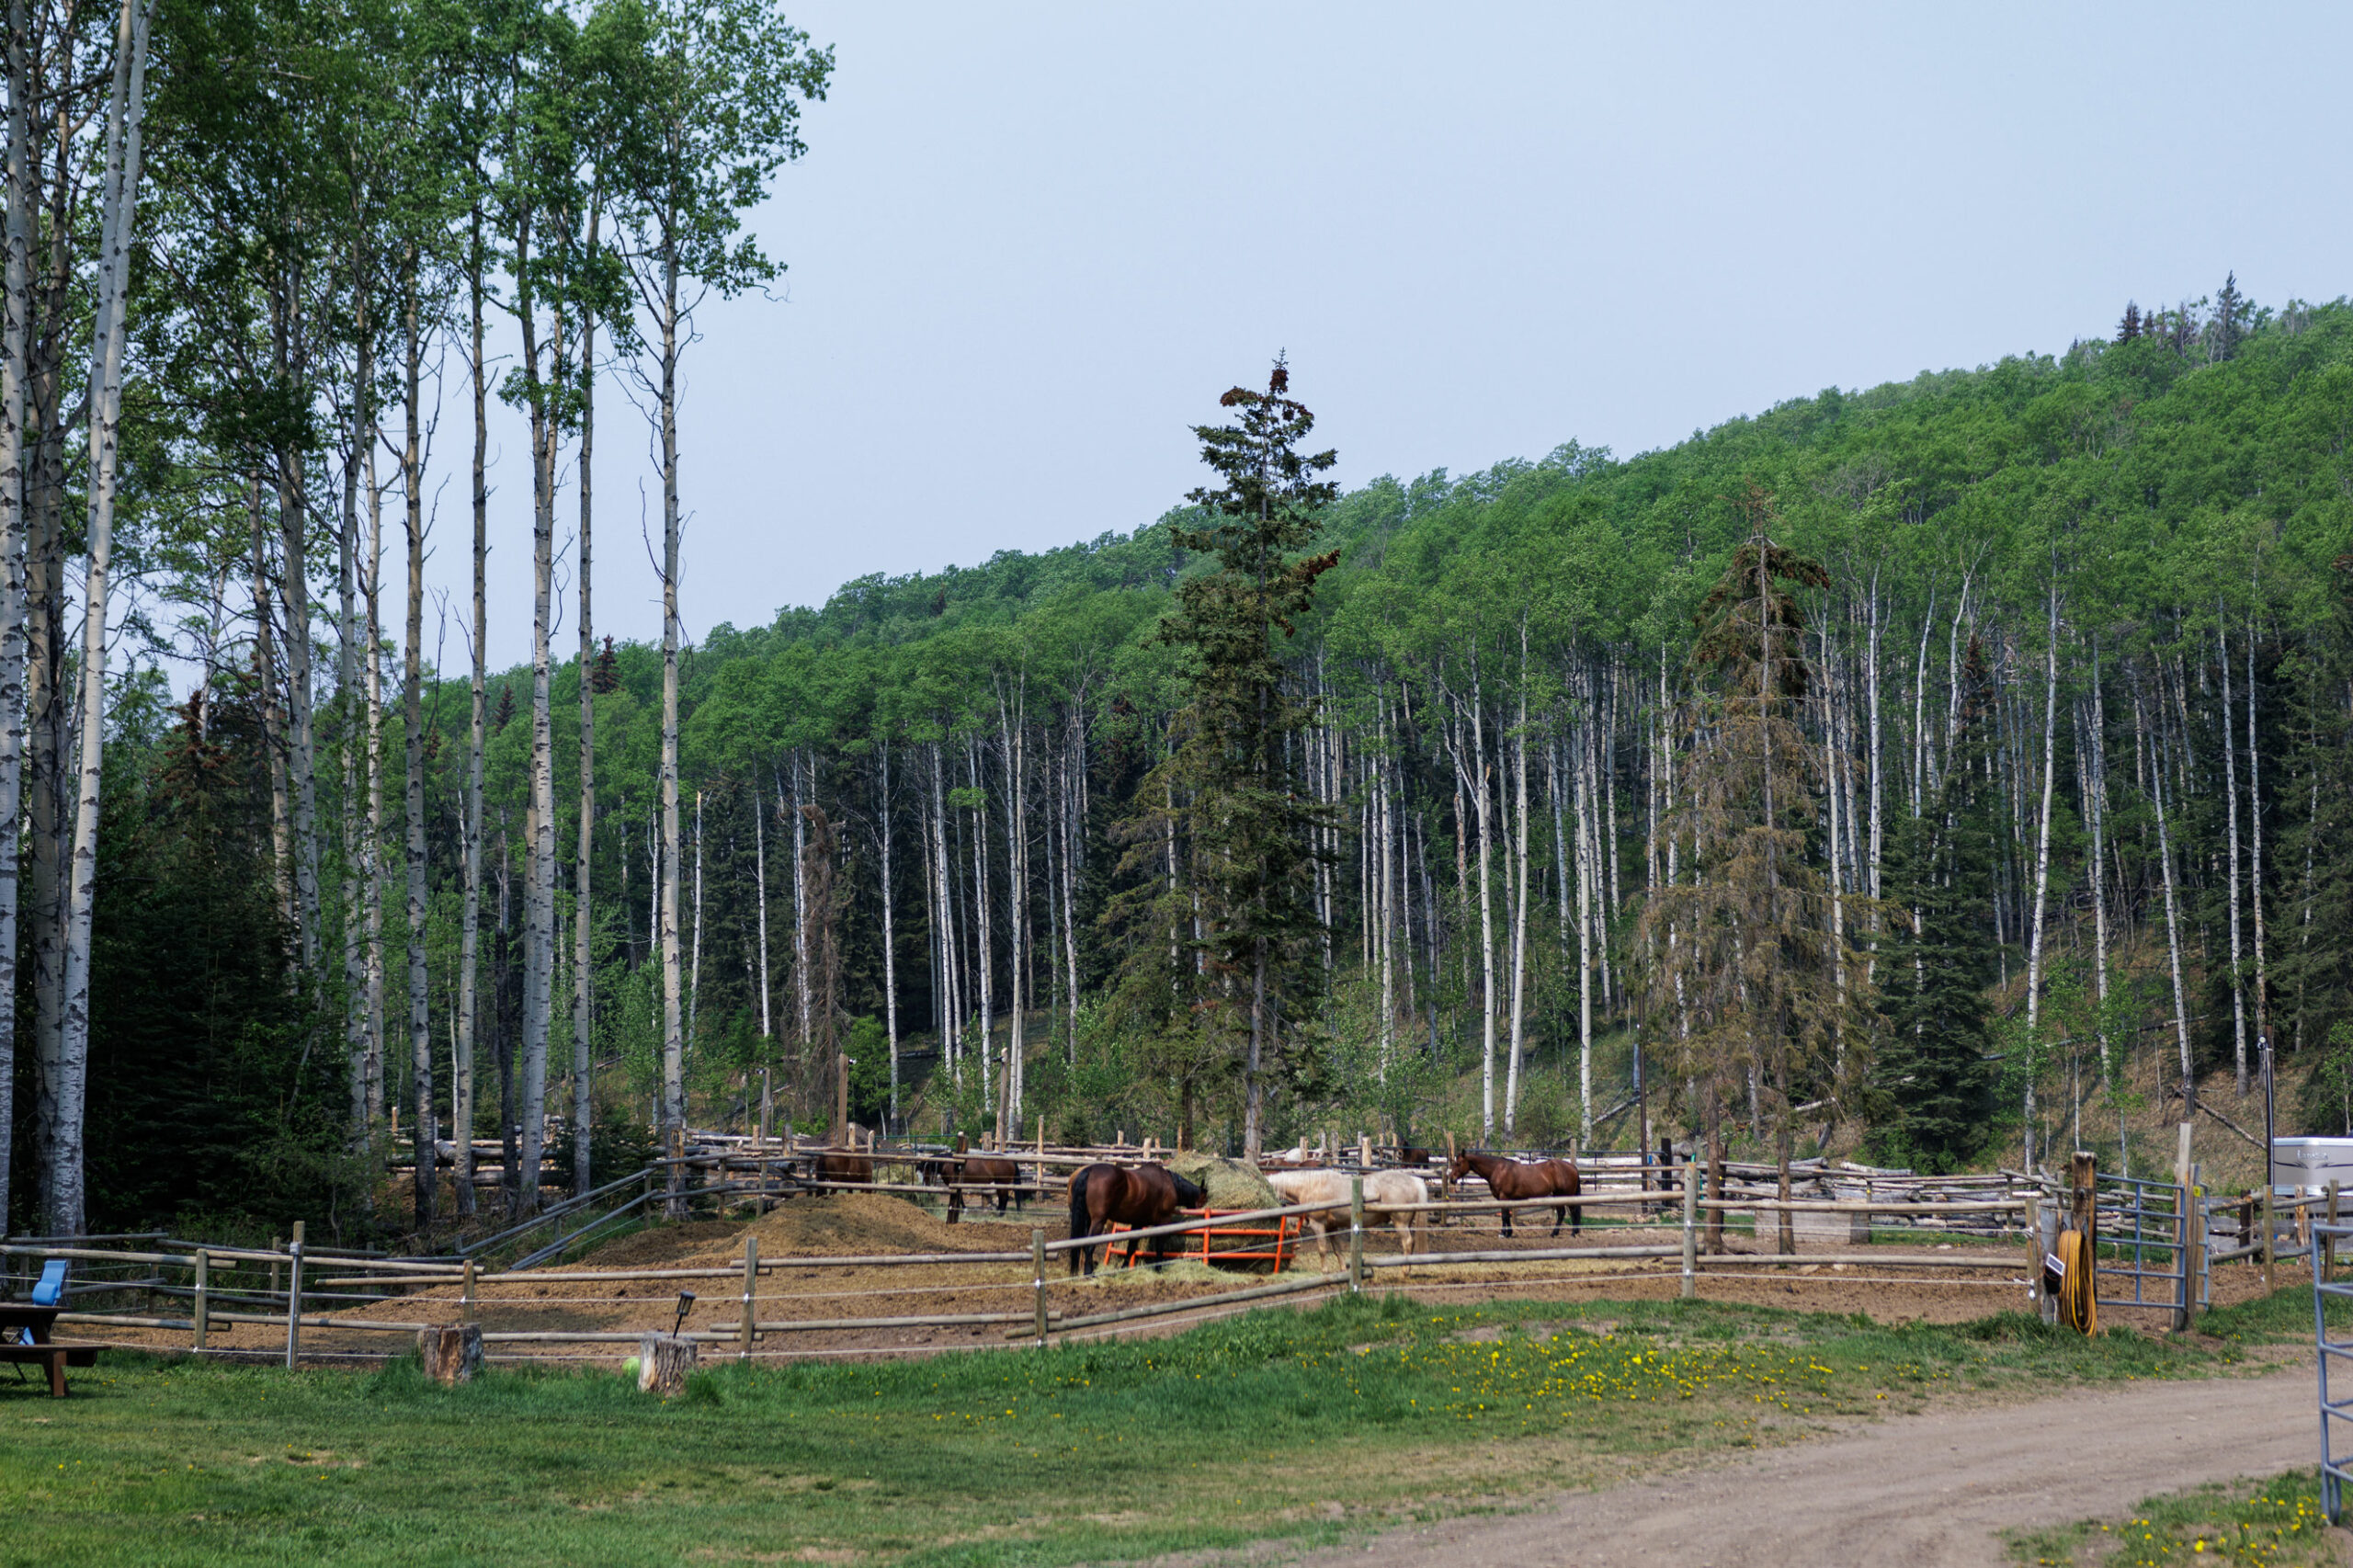 Horses in a corral next to forest near Grande Cache, Alta.